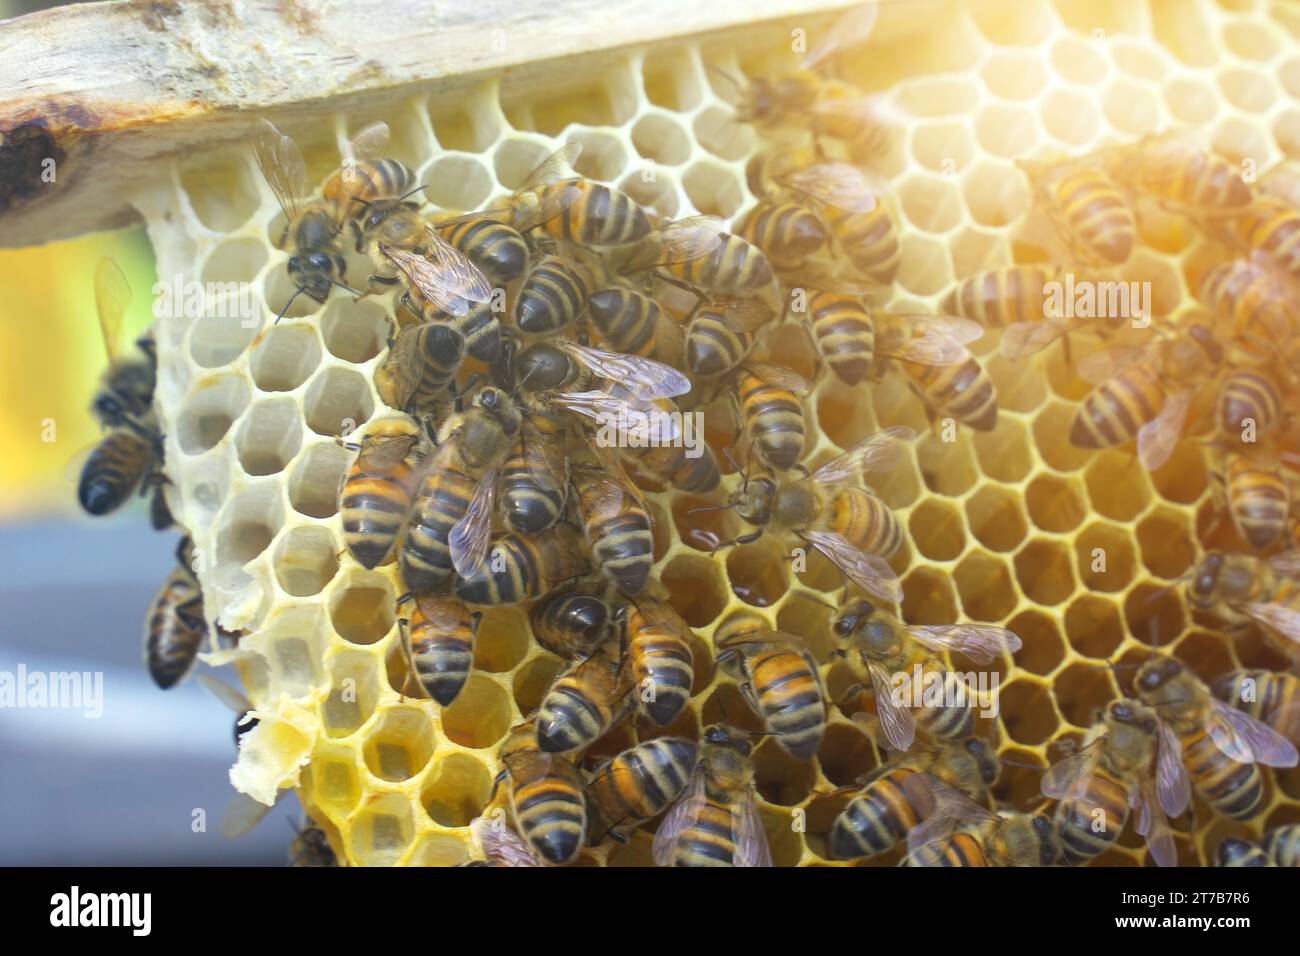 The beekeeper shows the queen bee in a nesting frame among the bees. Agricultural concept. Stock Photo